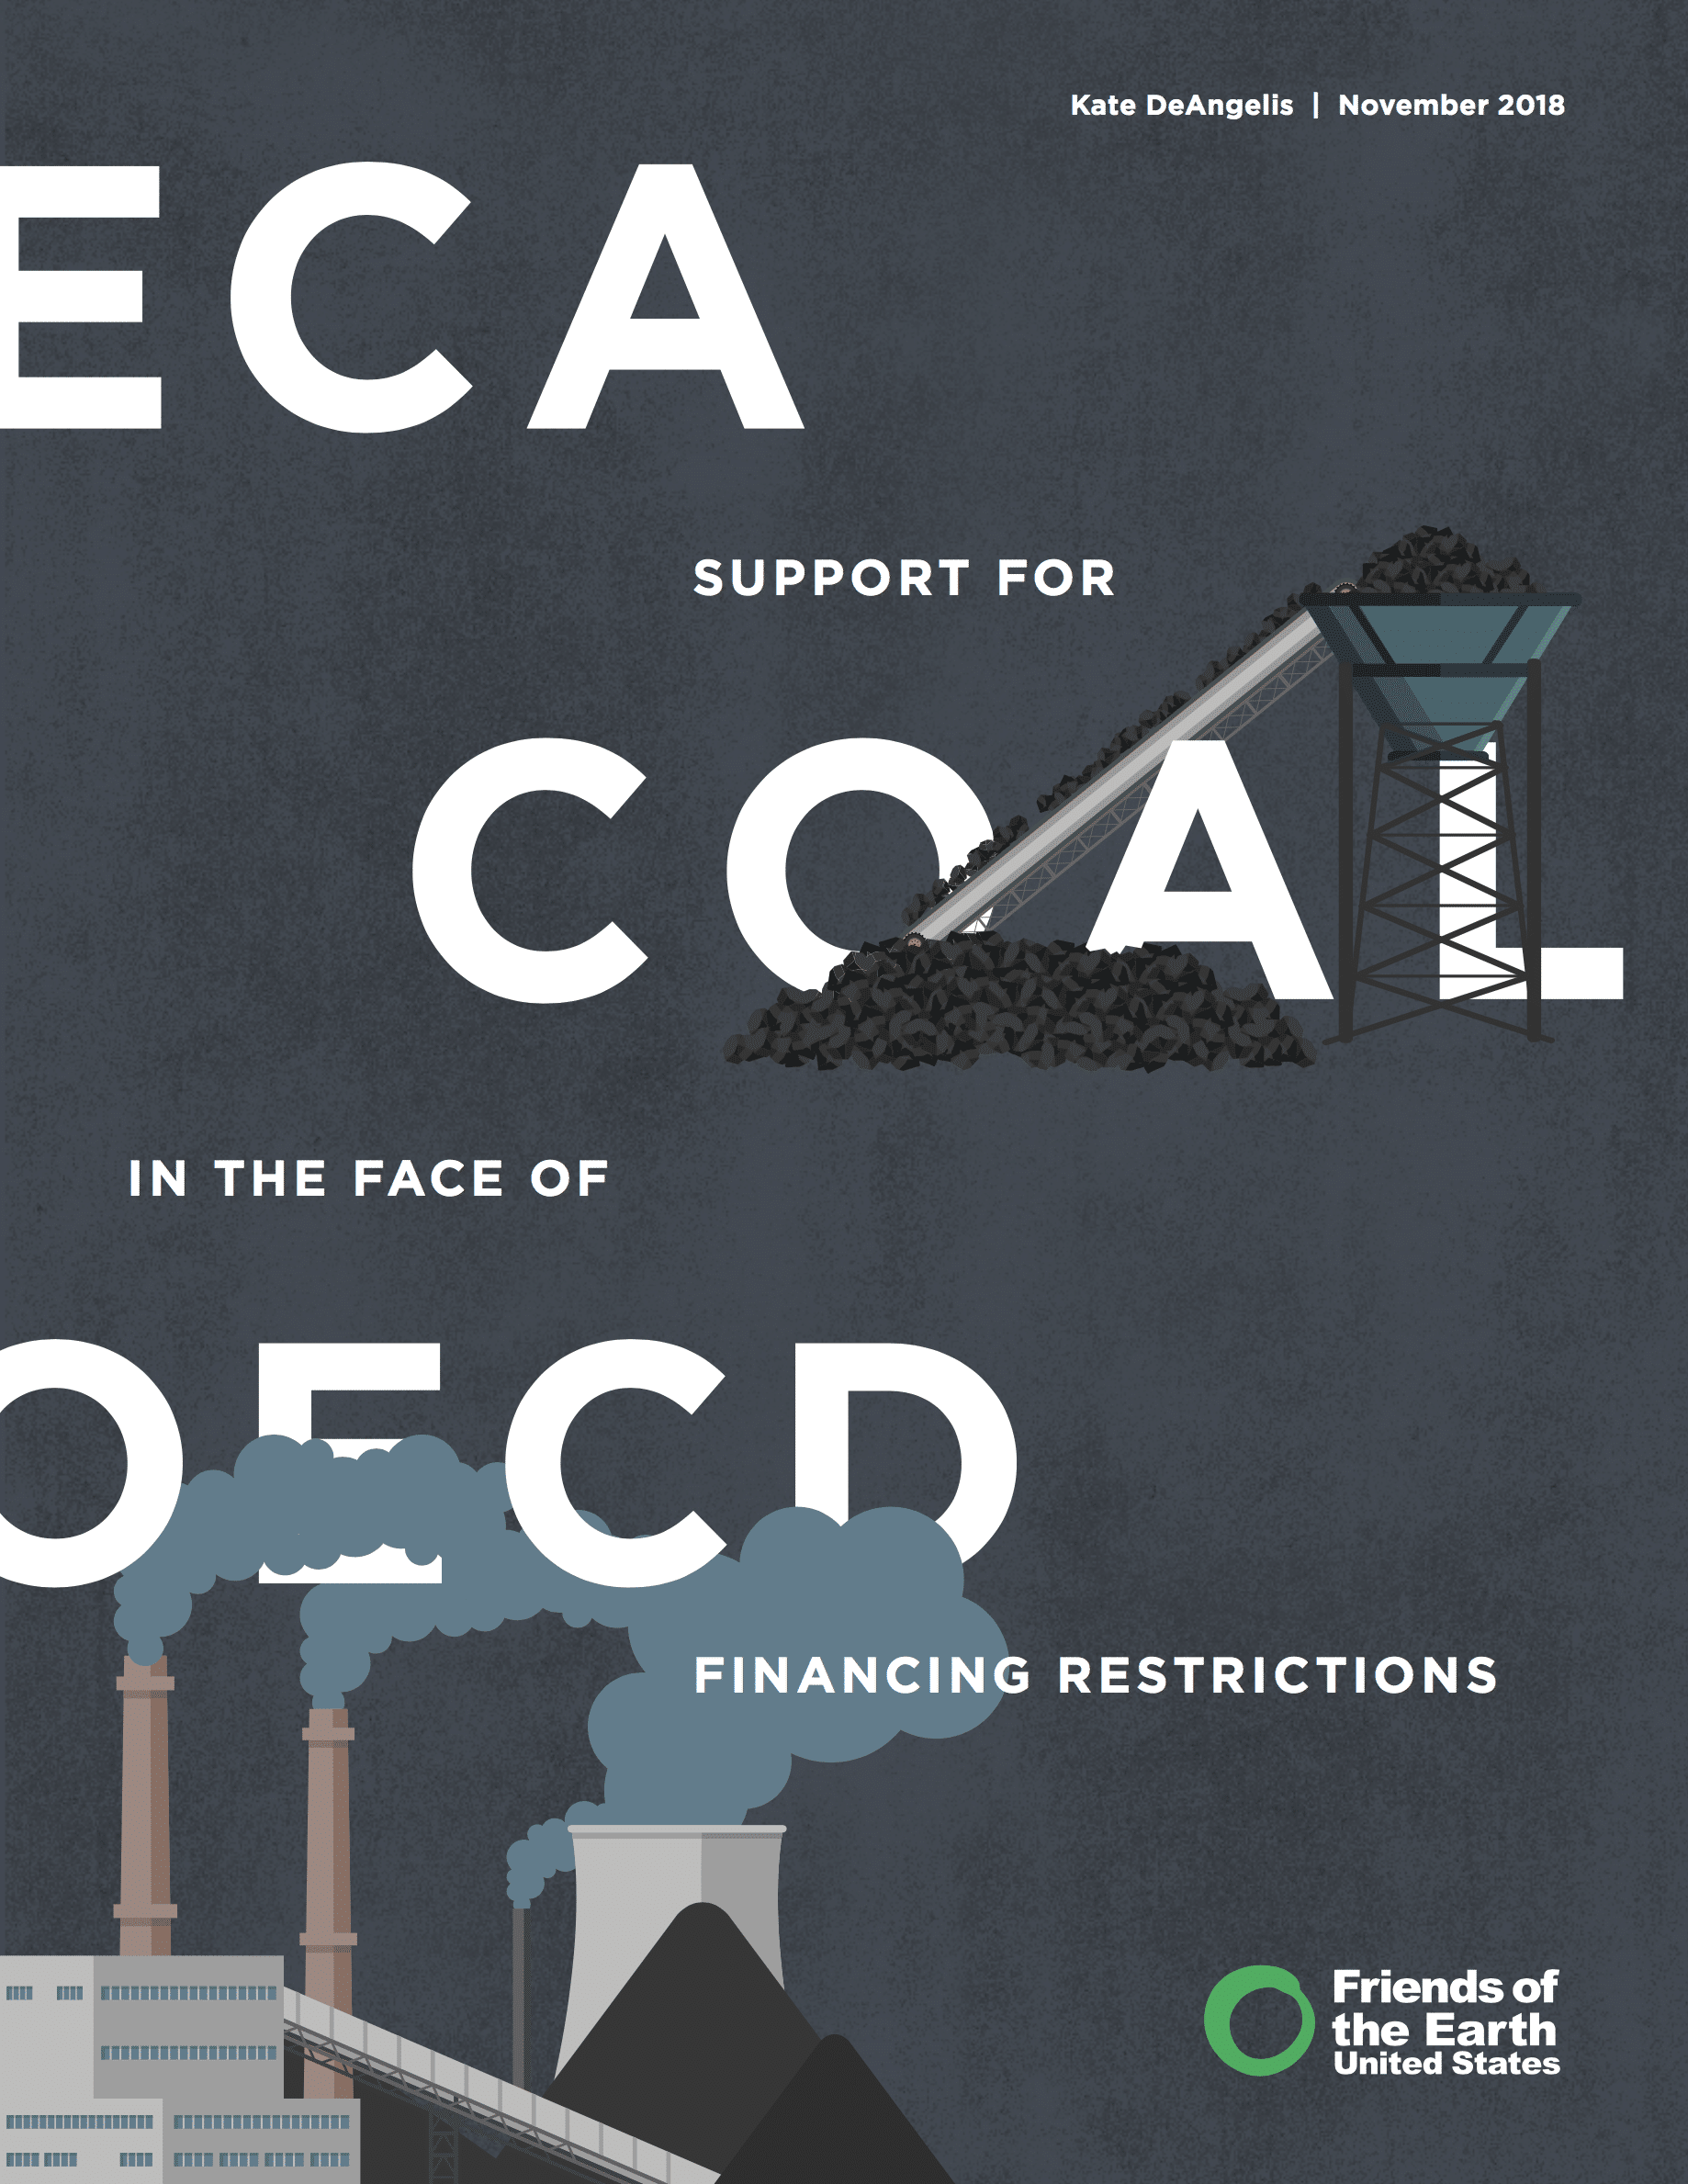 ECA Support for Coal in the Face of OECD Financing Restrictions